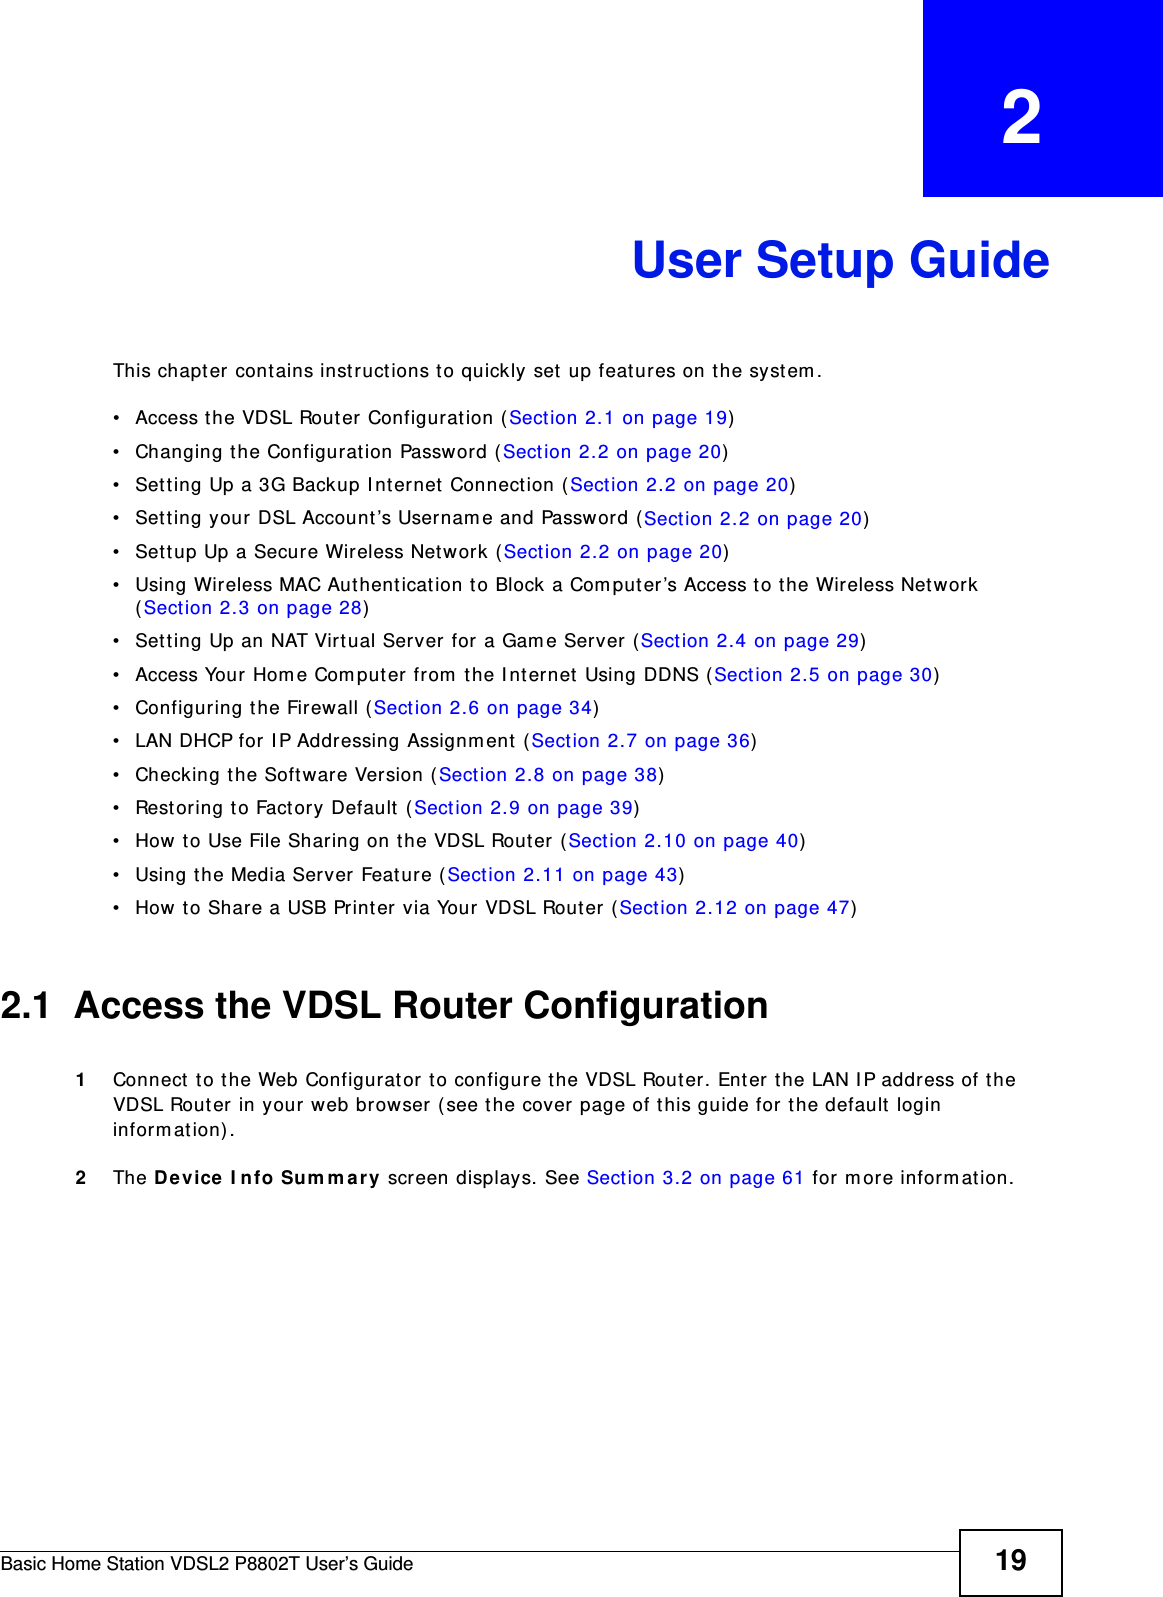 Basic Home Station VDSL2 P8802T User’s Guide 19CHAPTER   2User Setup GuideThis chapt er cont ains instruct ions to quickly set  up feat ures on t he syst em .• Access the VDSL Router Configuration (Sect ion 2.1 on page 19)• Changing t he Configuration Passw ord ( Sect ion 2.2 on page 20)• Set t ing Up a 3G Backup I nt ernet  Connect ion (Sect ion 2.2 on page 20)• Set t ing your DSL Account’s Usernam e and Passw ord ( Sect ion 2.2 on page 20)• Sett up Up a Secure Wireless Net work (Sect ion 2.2 on page 20)• Using Wireless MAC Aut henticat ion to Block a Com put er ’s Access t o t he Wireless Network (Sect ion 2.3 on page 28)• Sett ing Up an NAT Virtual Server for a Gam e Server (Sect ion 2.4 on page 29)• Access Your Hom e Com put er from  t he I nt ernet Using DDNS ( Sect ion 2.5 on page 30)• Configuring the Firewall (Sect ion 2.6 on page 34)• LAN DHCP for I P Addressing Assignm ent  (Sect ion 2.7 on page 36)• Checking t he Software Version (Sect ion 2.8 on page 38)• Rest oring t o Fact ory Default  ( Section 2.9 on page 39)• How t o Use File Sharing on t he VDSL Router (Sect ion 2.10 on page 40)• Using the Media Server Feat ure ( Sect ion 2.11 on page 43)• How t o Share a USB Printer via Your VDSL Rout er ( Sect ion 2.12 on page 47)2.1  Access the VDSL Router Configuration1Connect  to t he Web Configurator t o configure the VDSL Rout er. Ent er the LAN I P address of t he VDSL Router in your web browser (see t he cover page of this guide for the default login in form at ion) .2The D evice  I nfo Sum m a ry screen displays. See Sect ion 3.2 on page 61 for m ore inform ation.